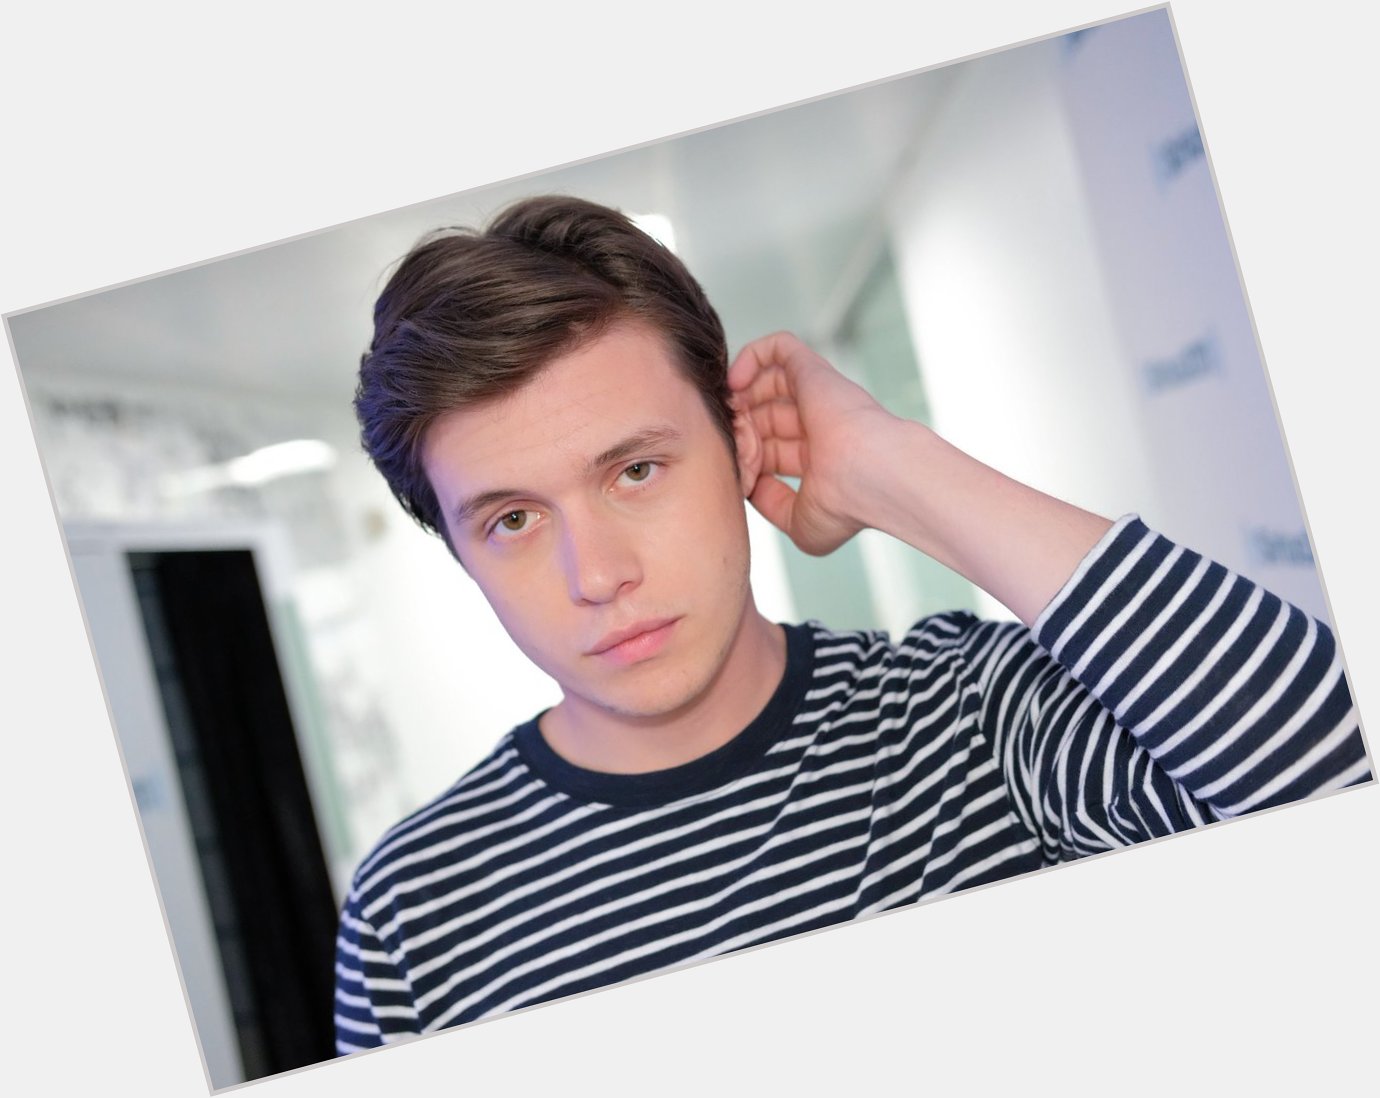 Happy birthday to the hunk that is nick robinson. king. 